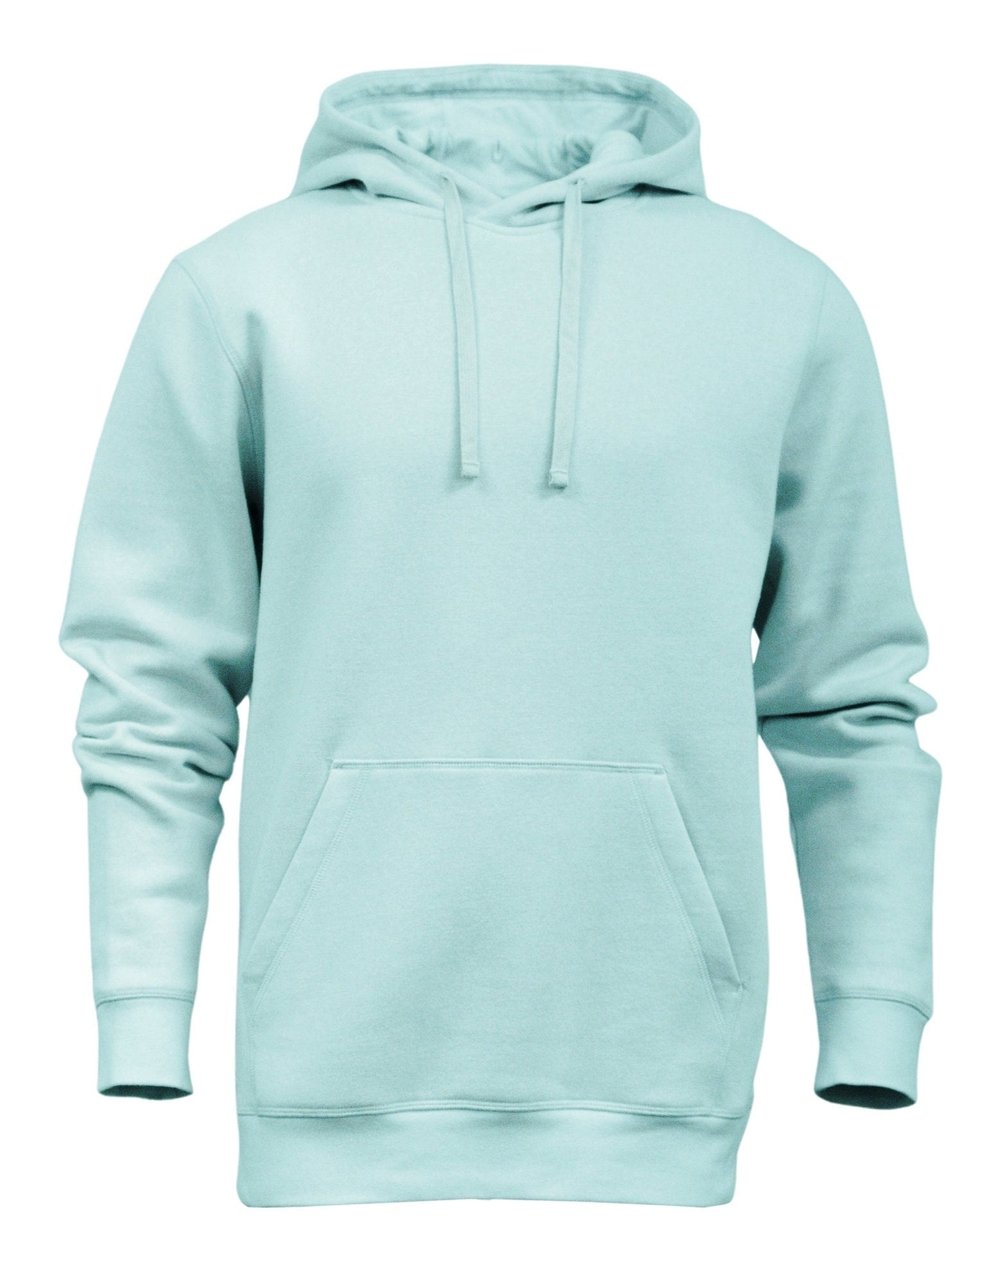 Full Sleeves Cotton Blank Sublimation Hoodies at Rs 190/piece in